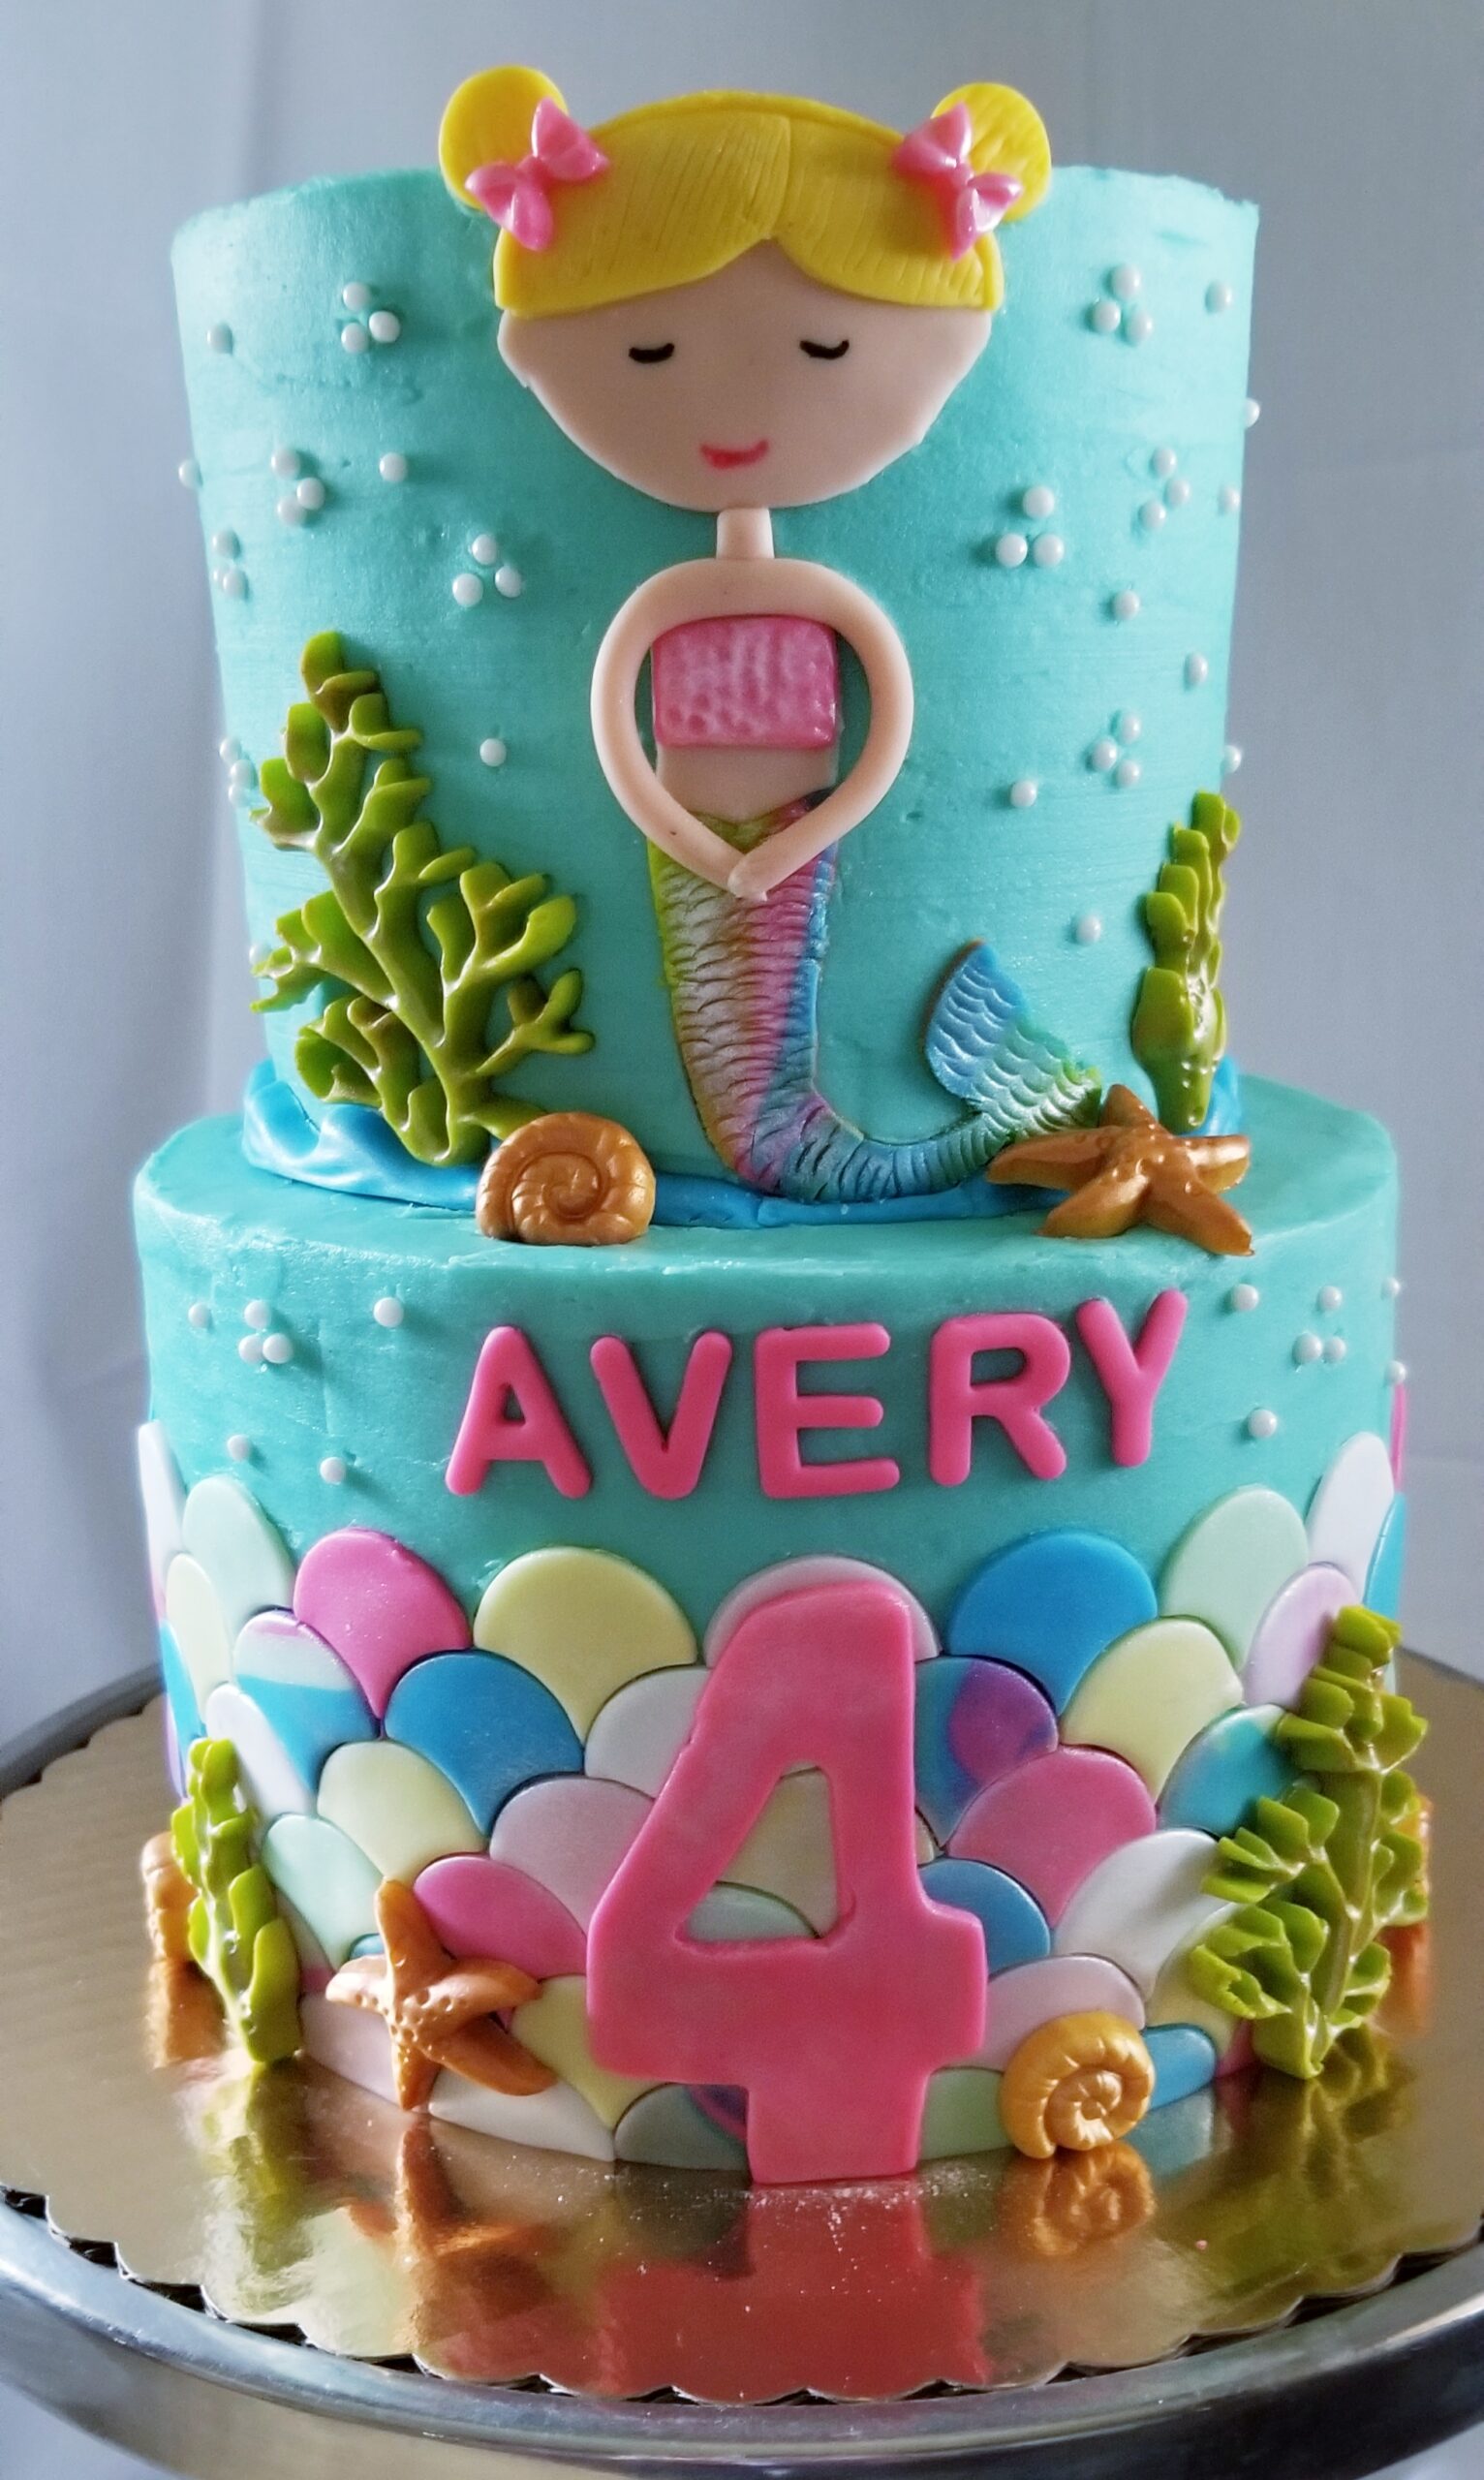 Ideas For Kids' Birthday Cake Designs | Marie Makes